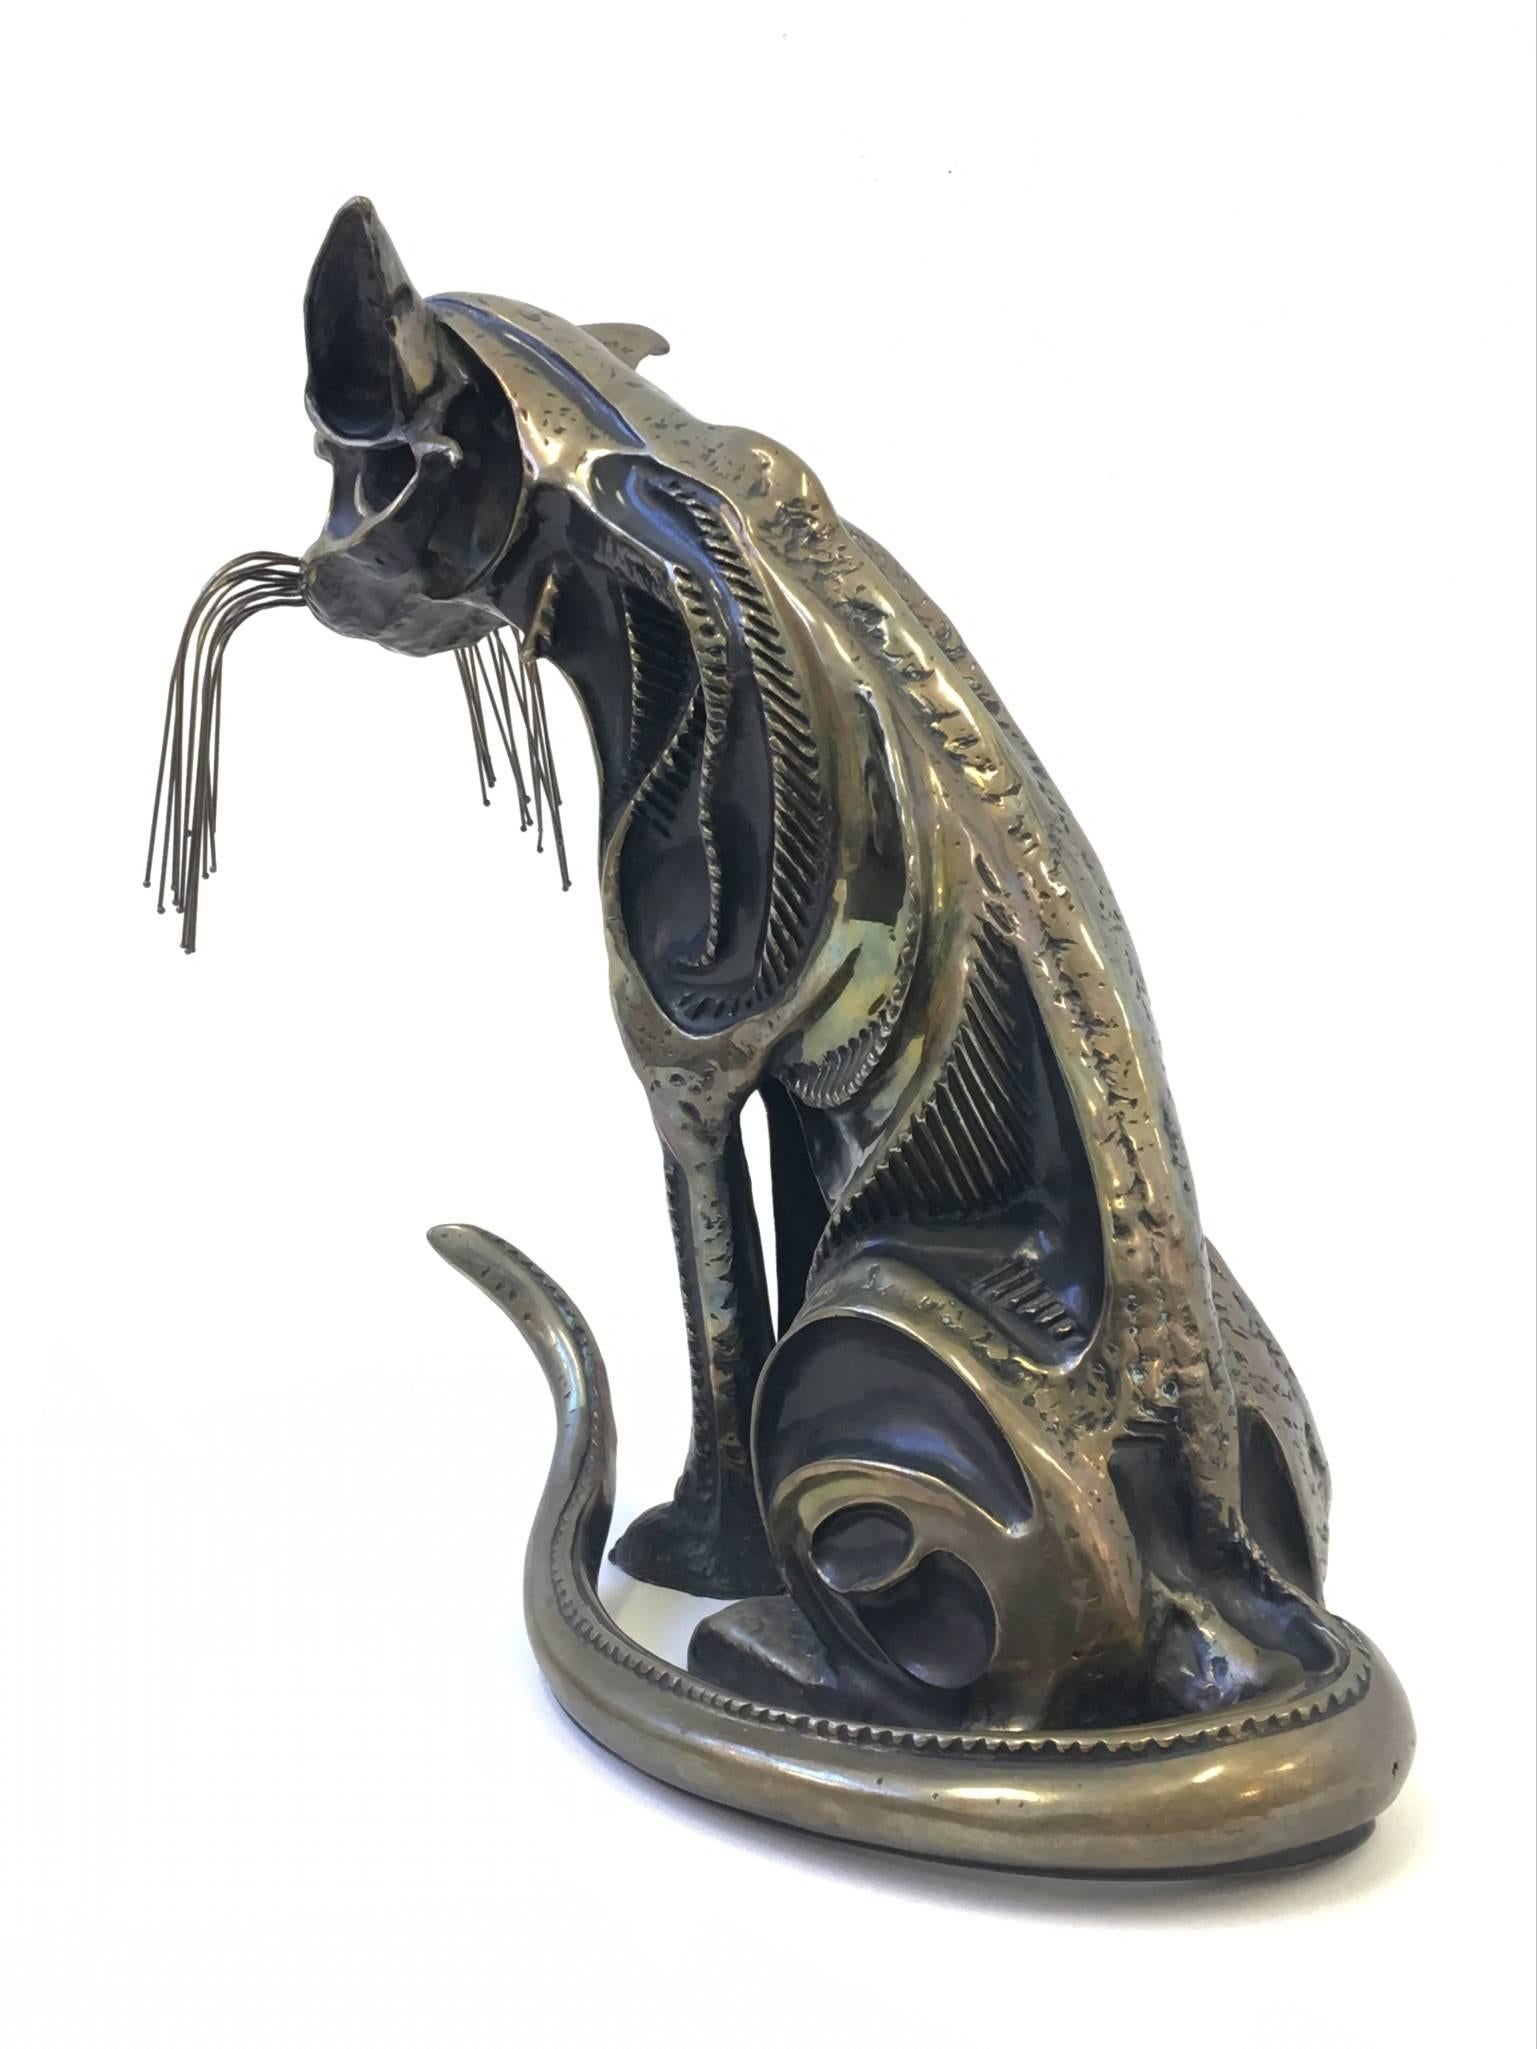 Modern Bronze Cat Sculpture Signed and Numbered by John Jagger